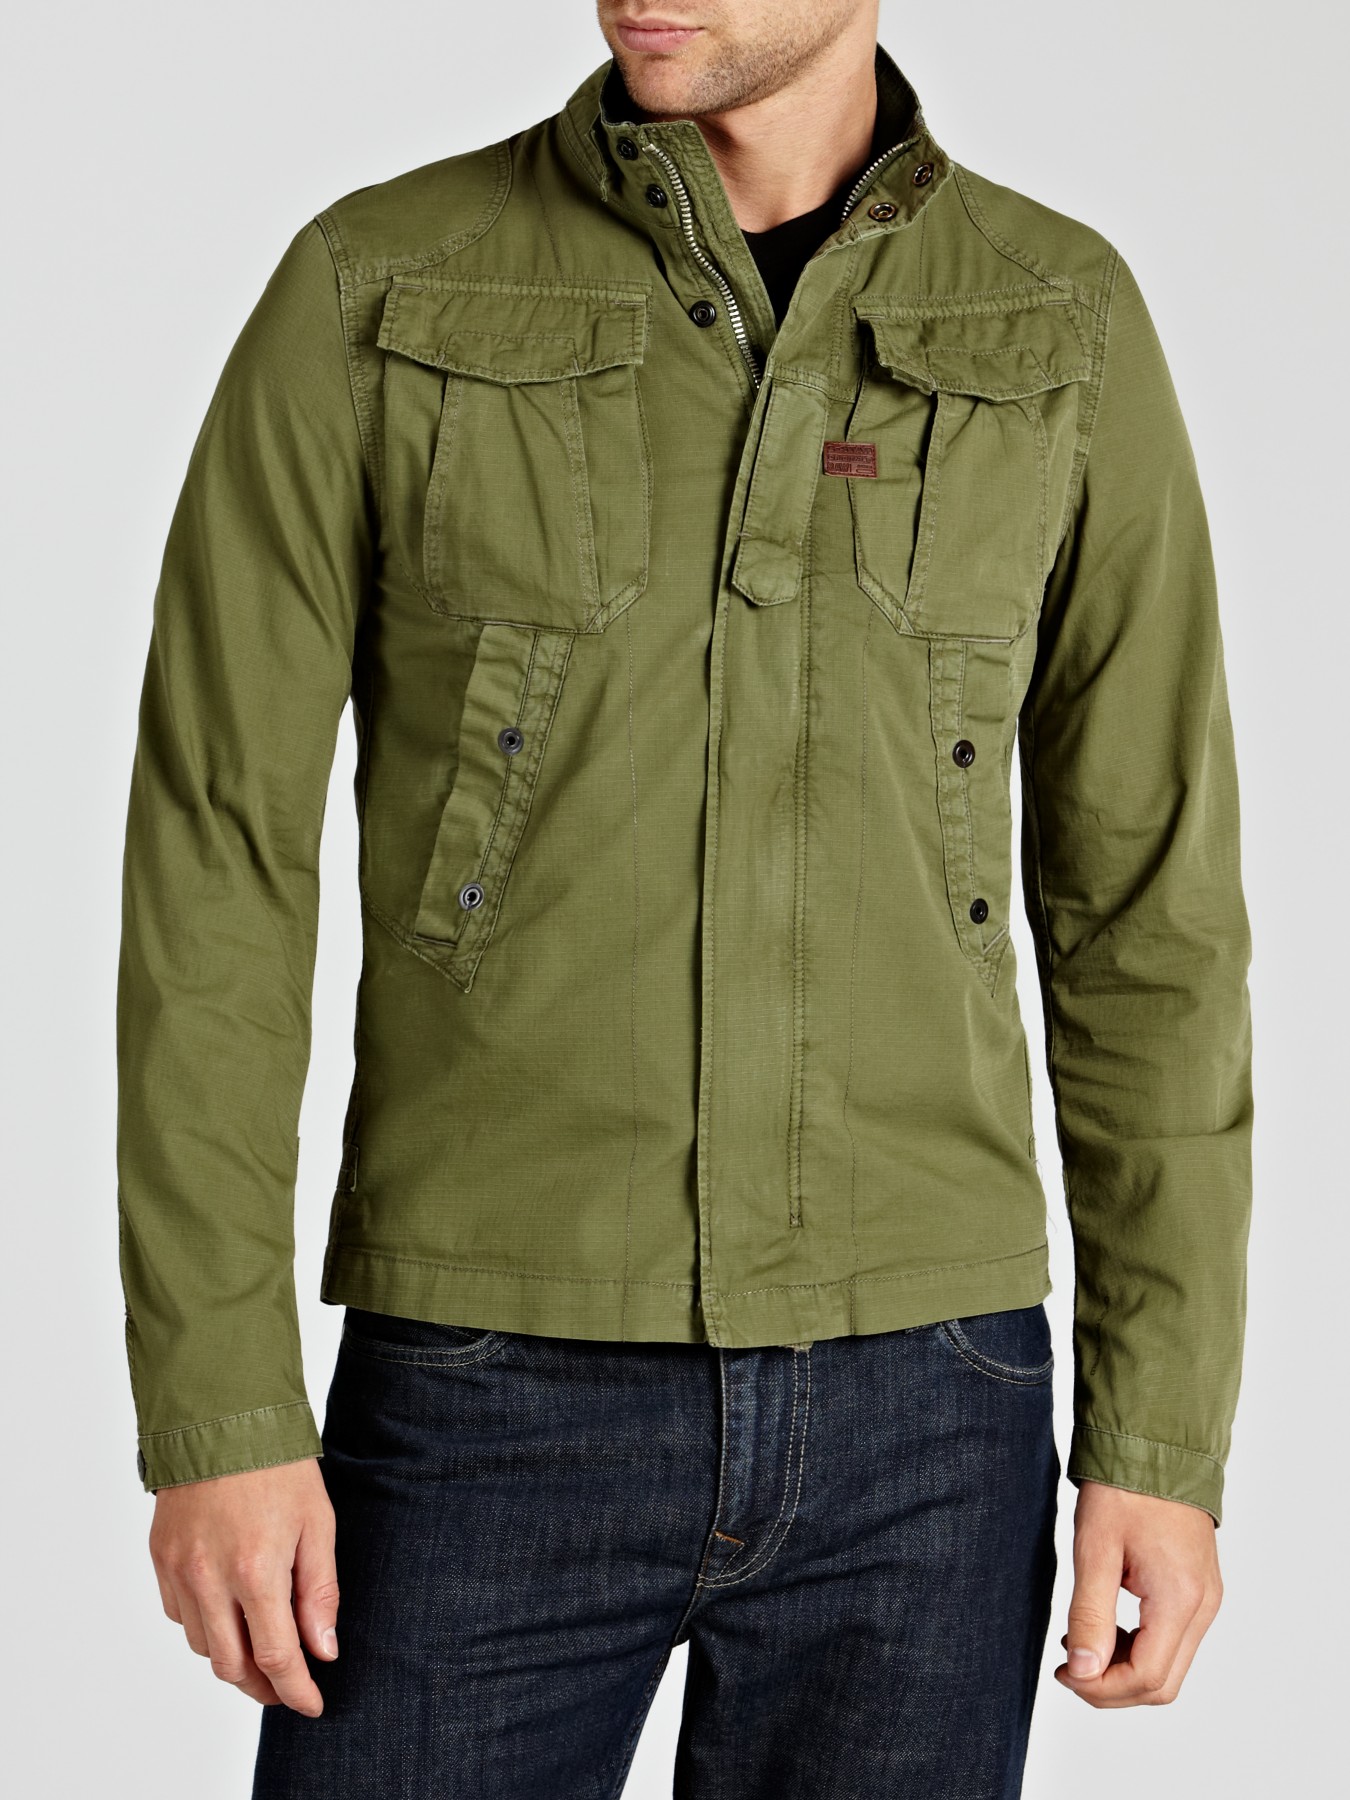 G-Star RAW Zero Long Sleeve Overshirt in Sage (Green) for Men - Lyst